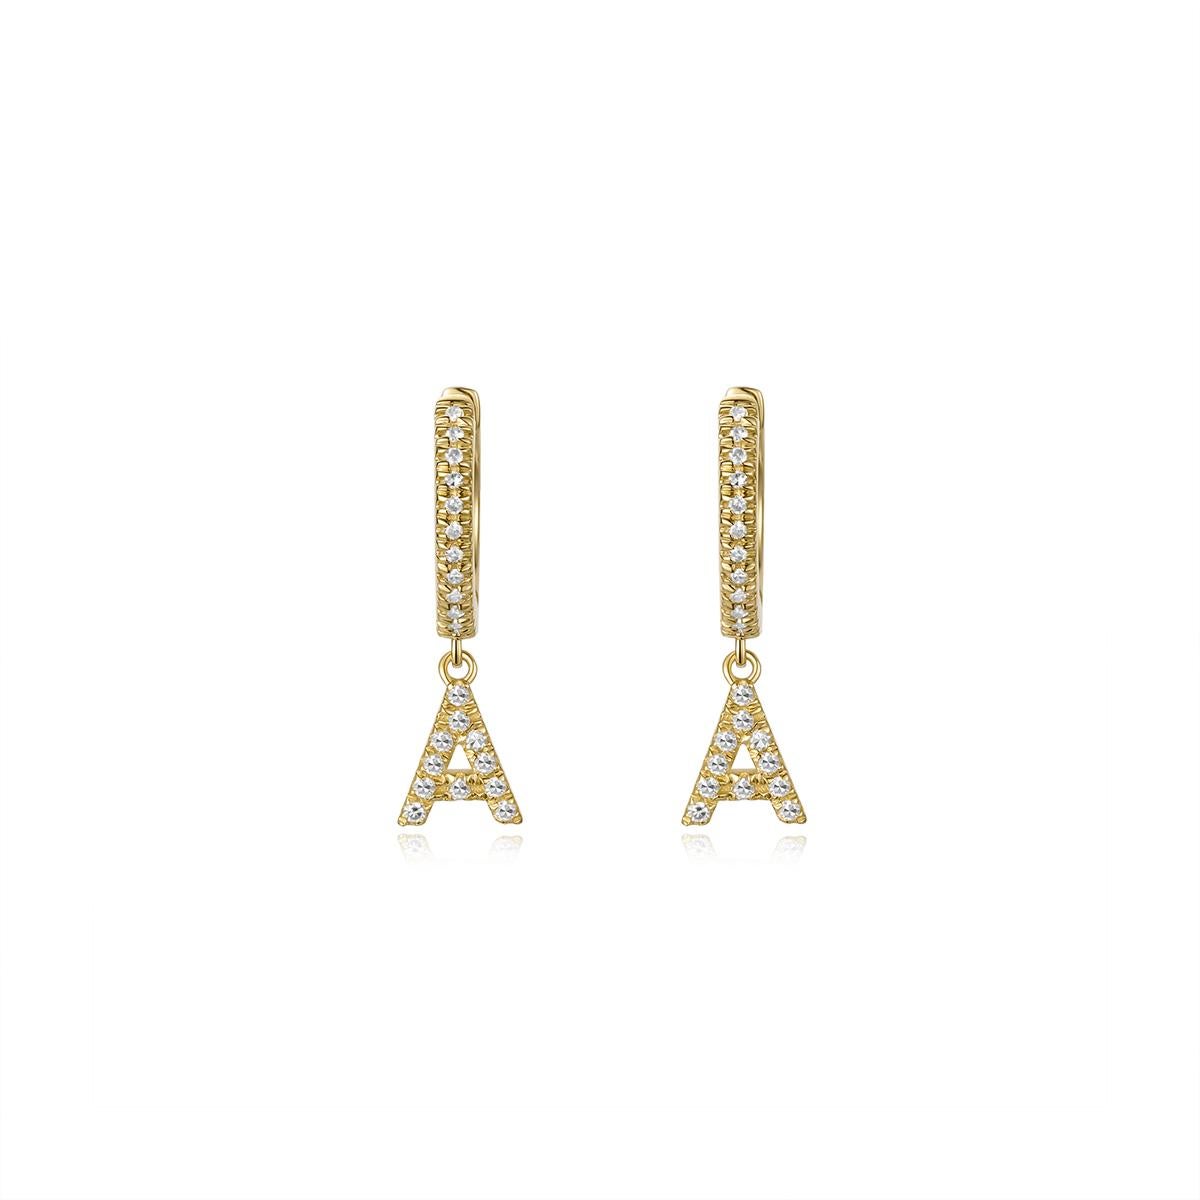 Ada's Initial Earrings In New Condition For Sale In Los Angeles, CA